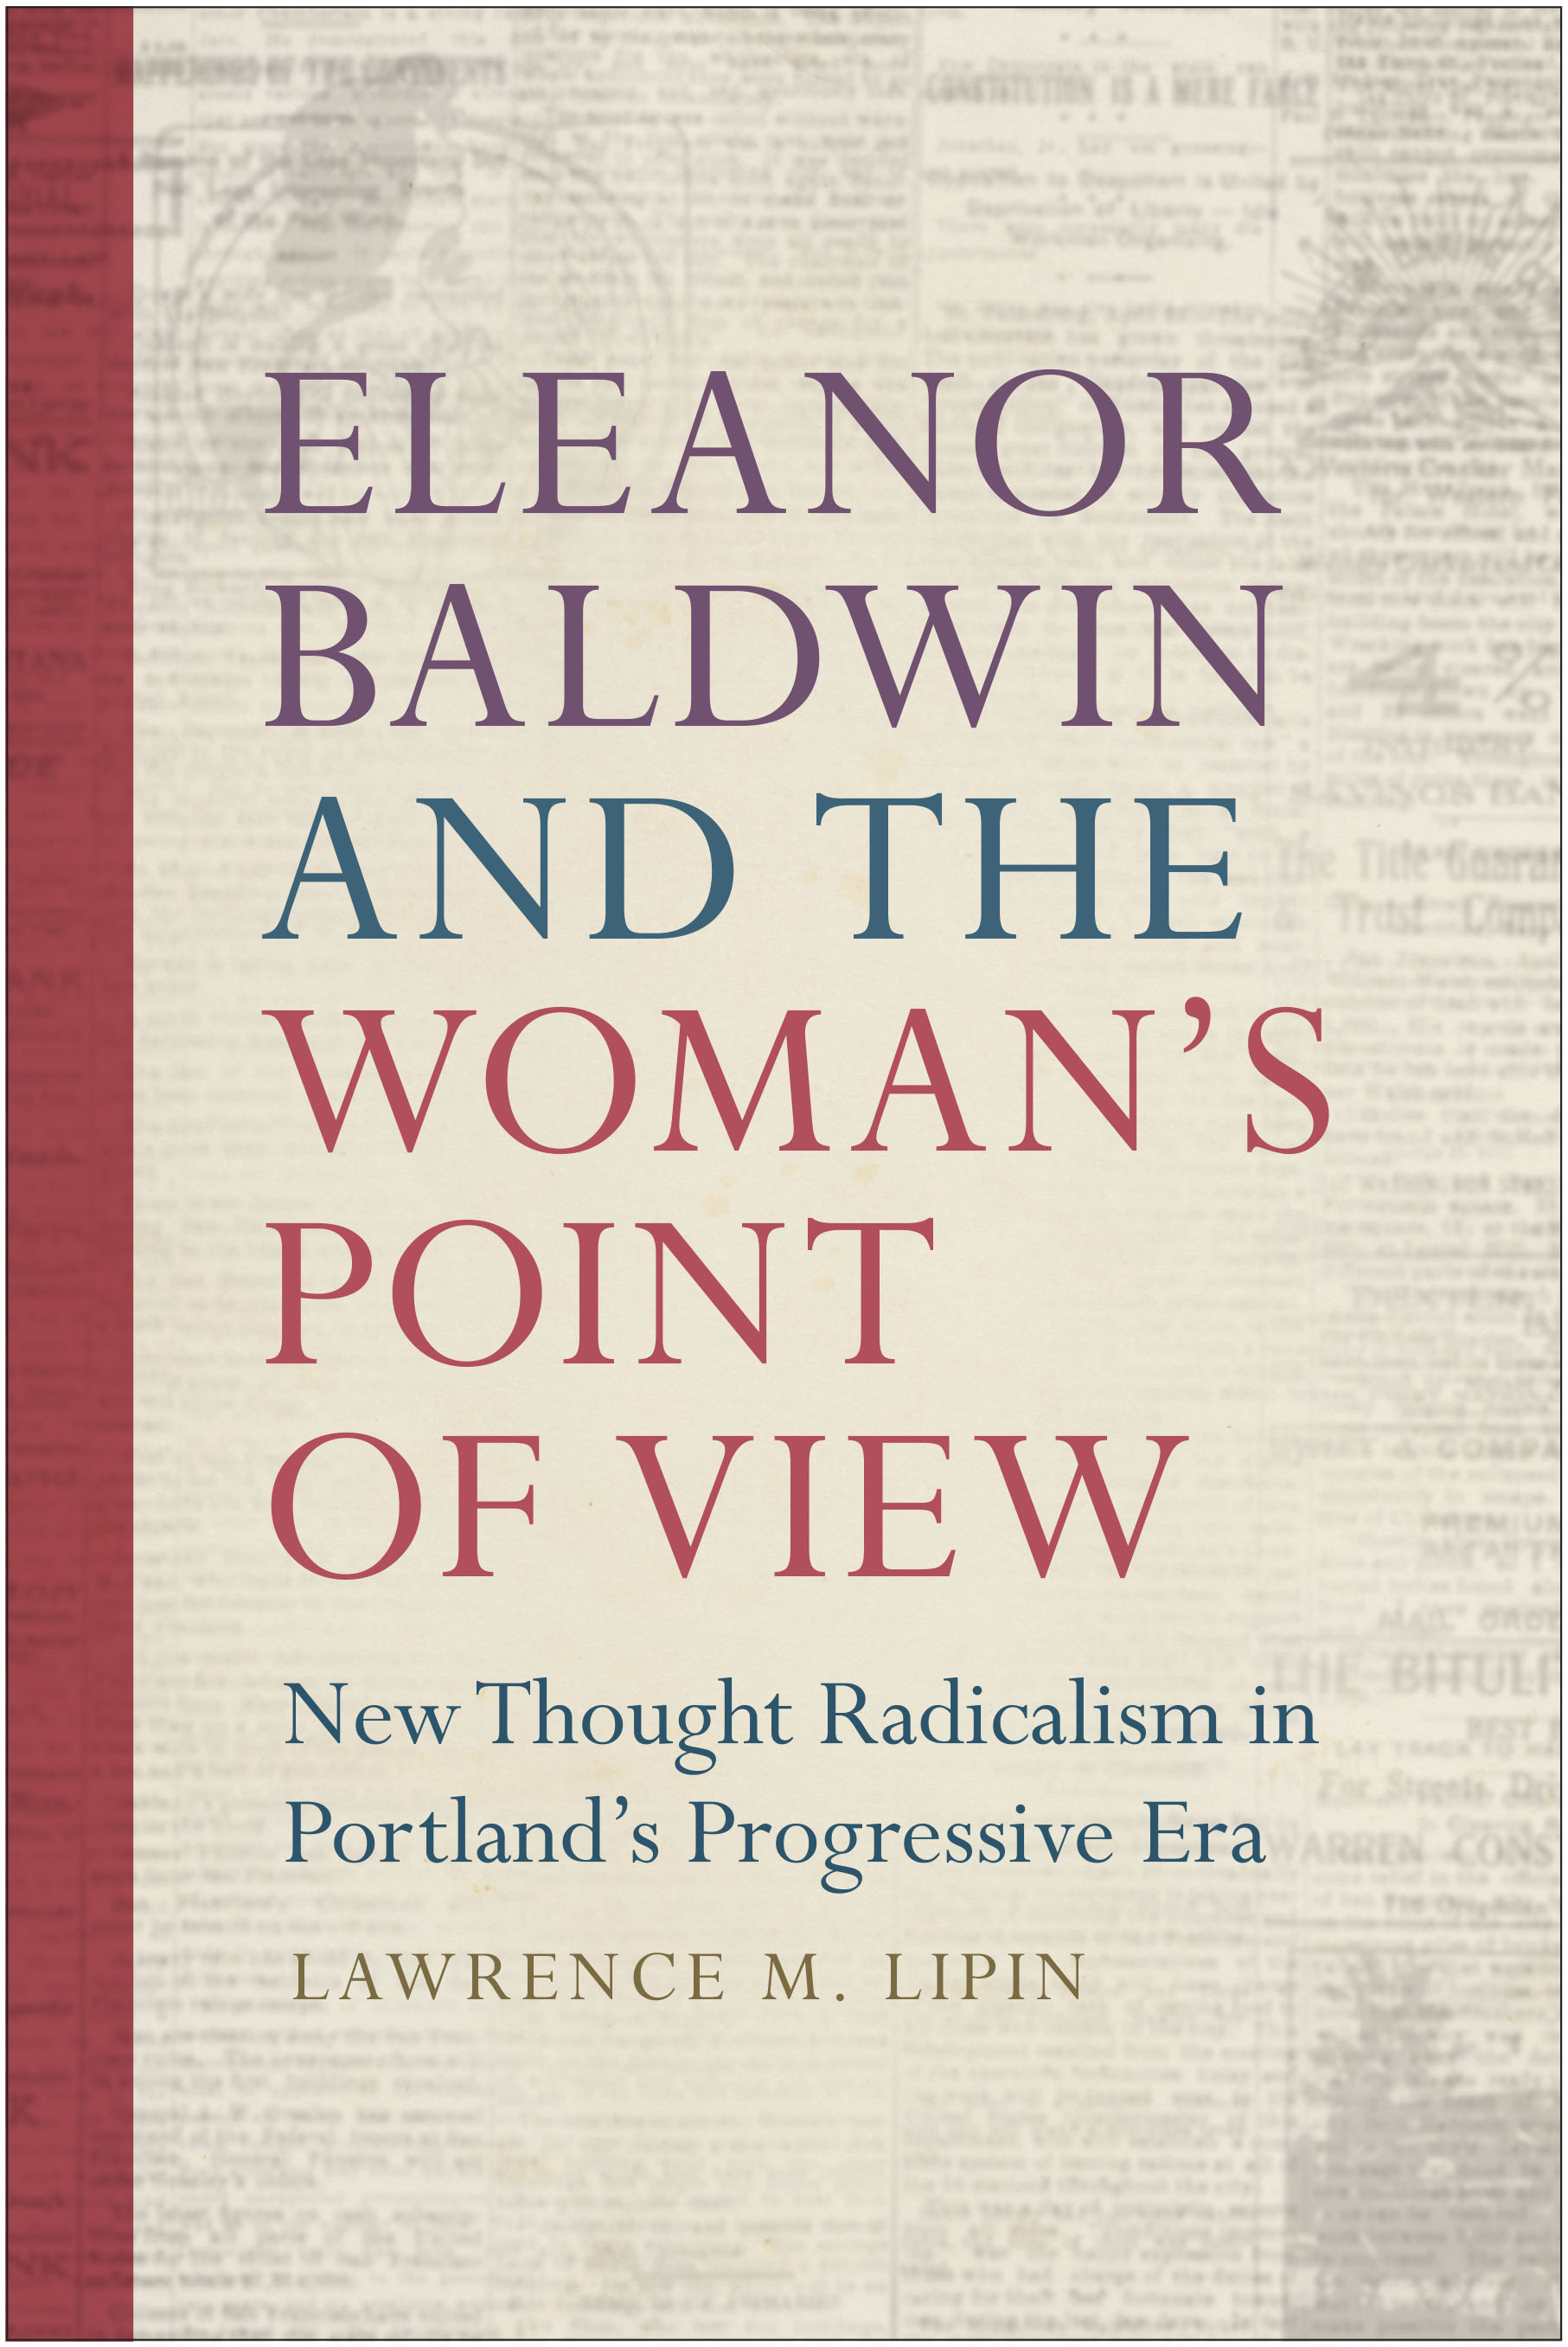 Larry Lipin's "Eleanor Baldwin and the Woman's Point of View"